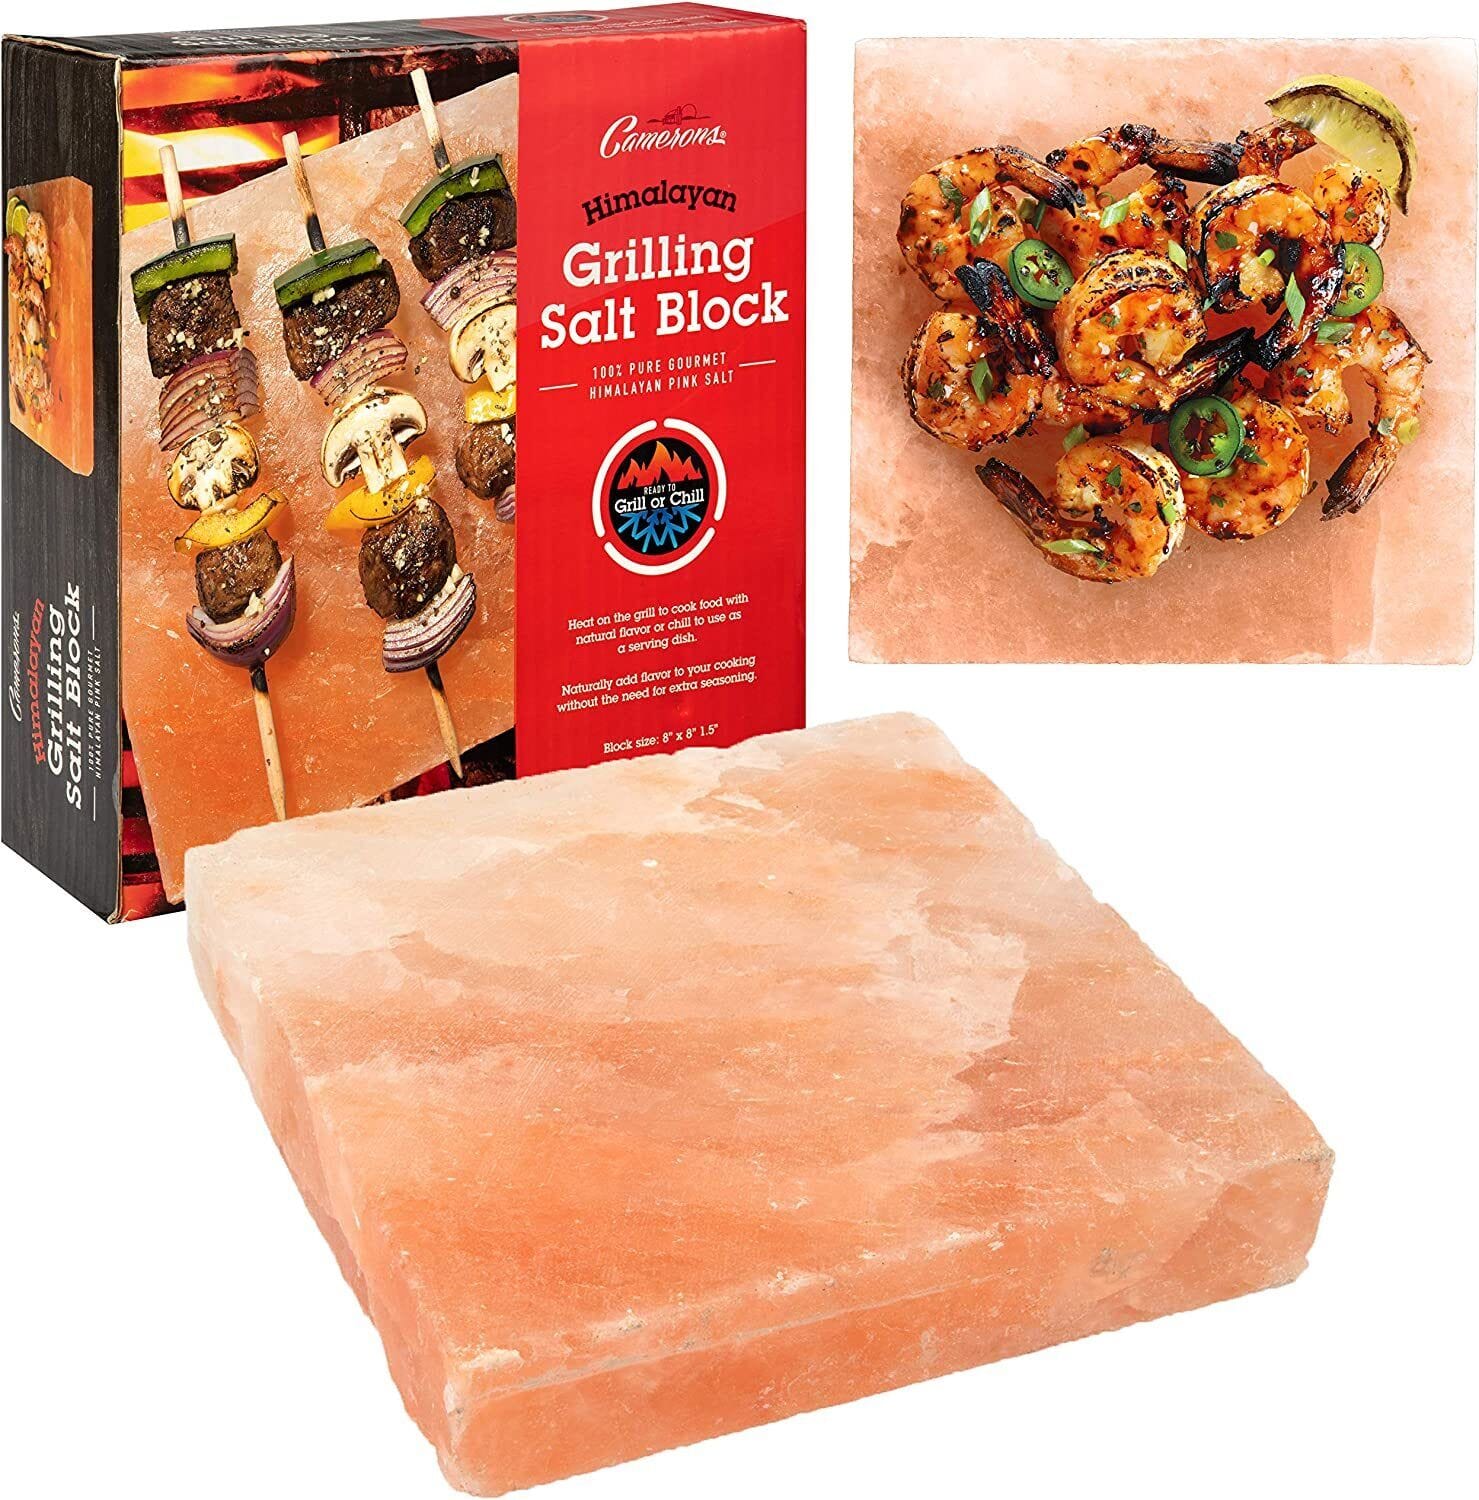 Himalayan Salt Block for Grilling (Large 8 x 8) - FDA Approved All Natural Cooking Slab